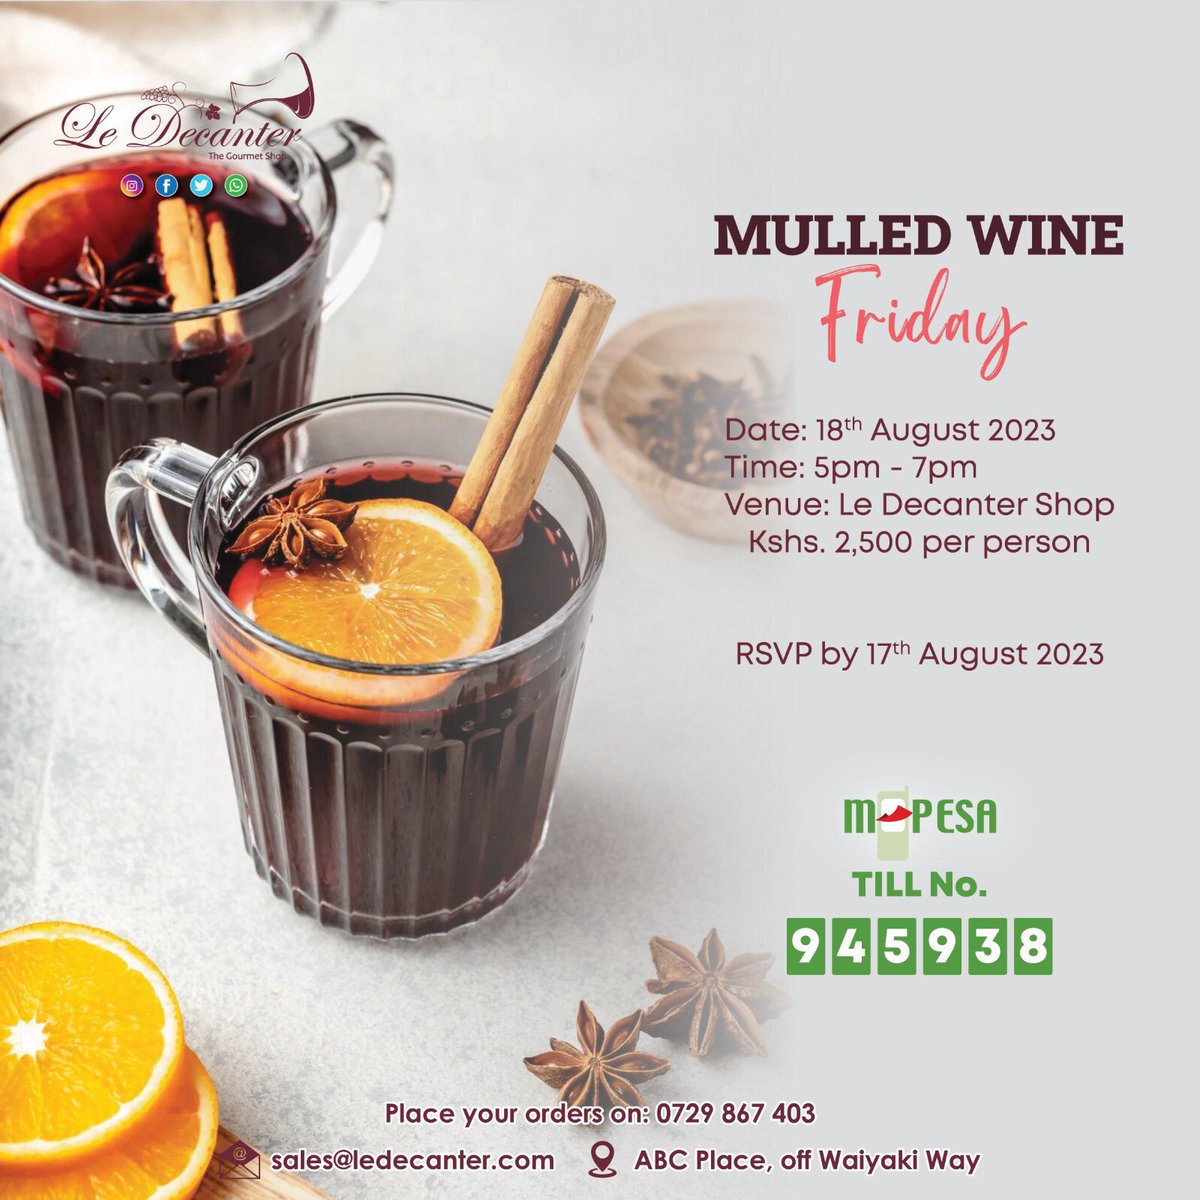 Join us on 11th August  for mulled wine tasting experience at our shop located at ABC place, off Waiyaki way. To book kindly call us on 0729867403/email us on sales@ledecanter.com   #wineevent#mulledwine #ledecanterwines